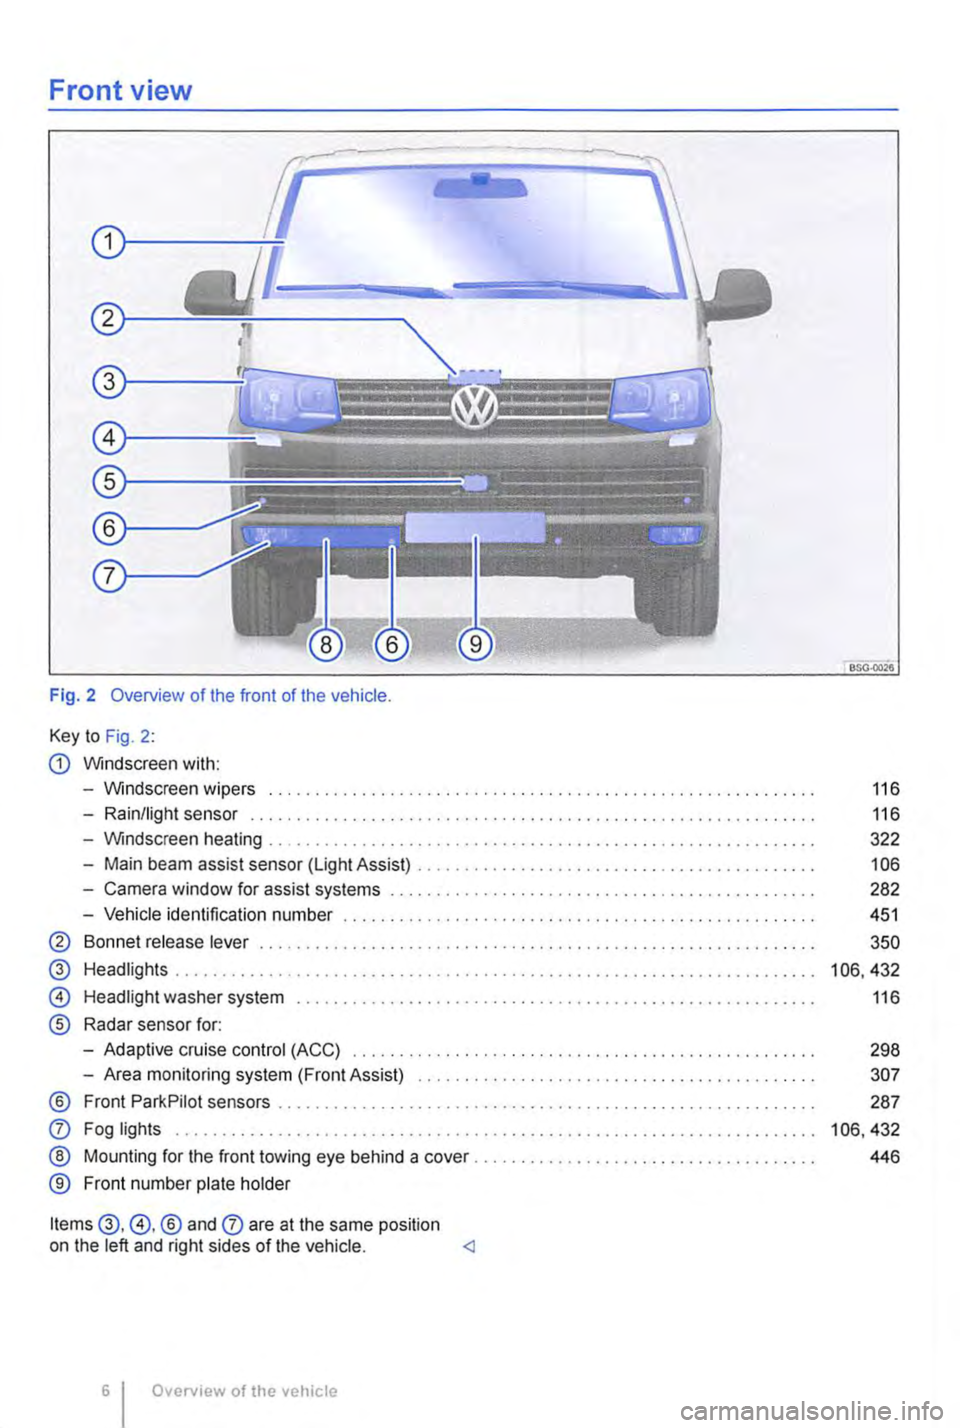 VOLKSWAGEN TRANSPORTER 2018  Owners Manual Front view 
Fig. 2 Overview of the front of the vehicle. 
Key to Fig. 2: 
G) Windscreen with: 
-Windscreen wipers .............. . 
-Rain/light sensor .............. . 
-Windscreen heating 
-Main beam